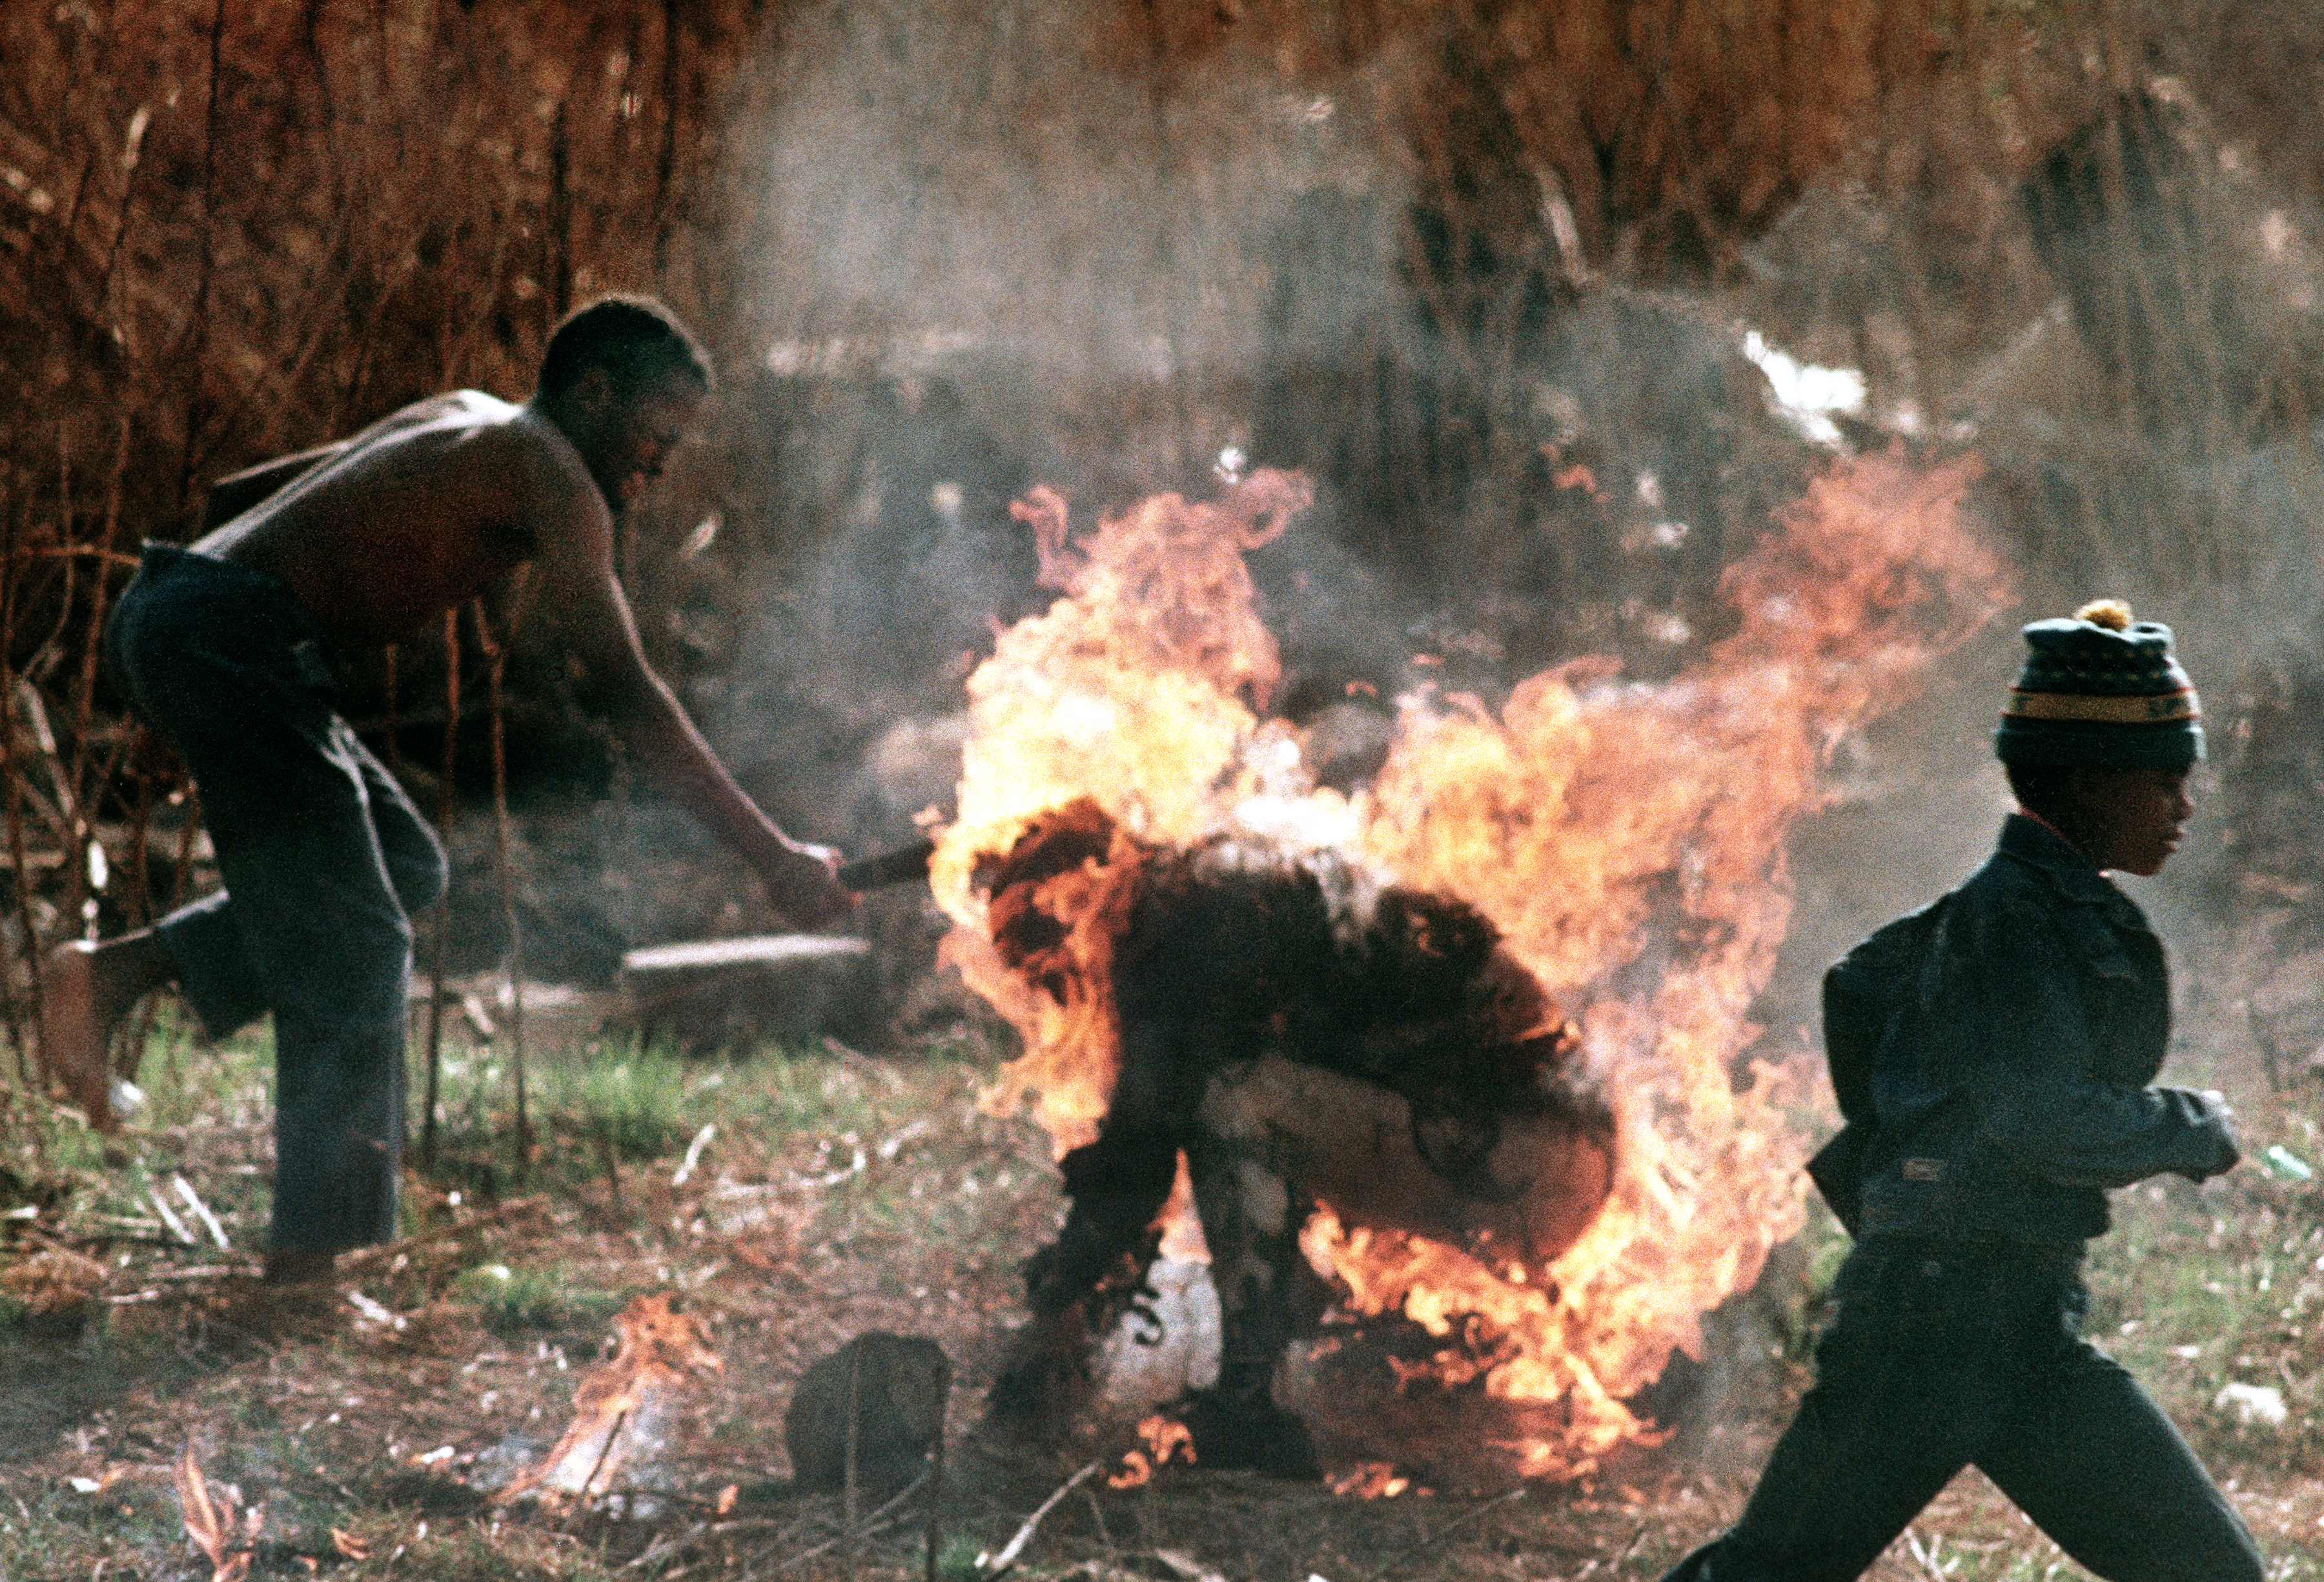 The burning body of a man identified as a Zulu Inkatha supporter is clubbed by a follower of the rival African National Congress during factional violence in Soweto, South Africa, on Sept. 15, 1990. (AP Photo/Greg Marinovich)